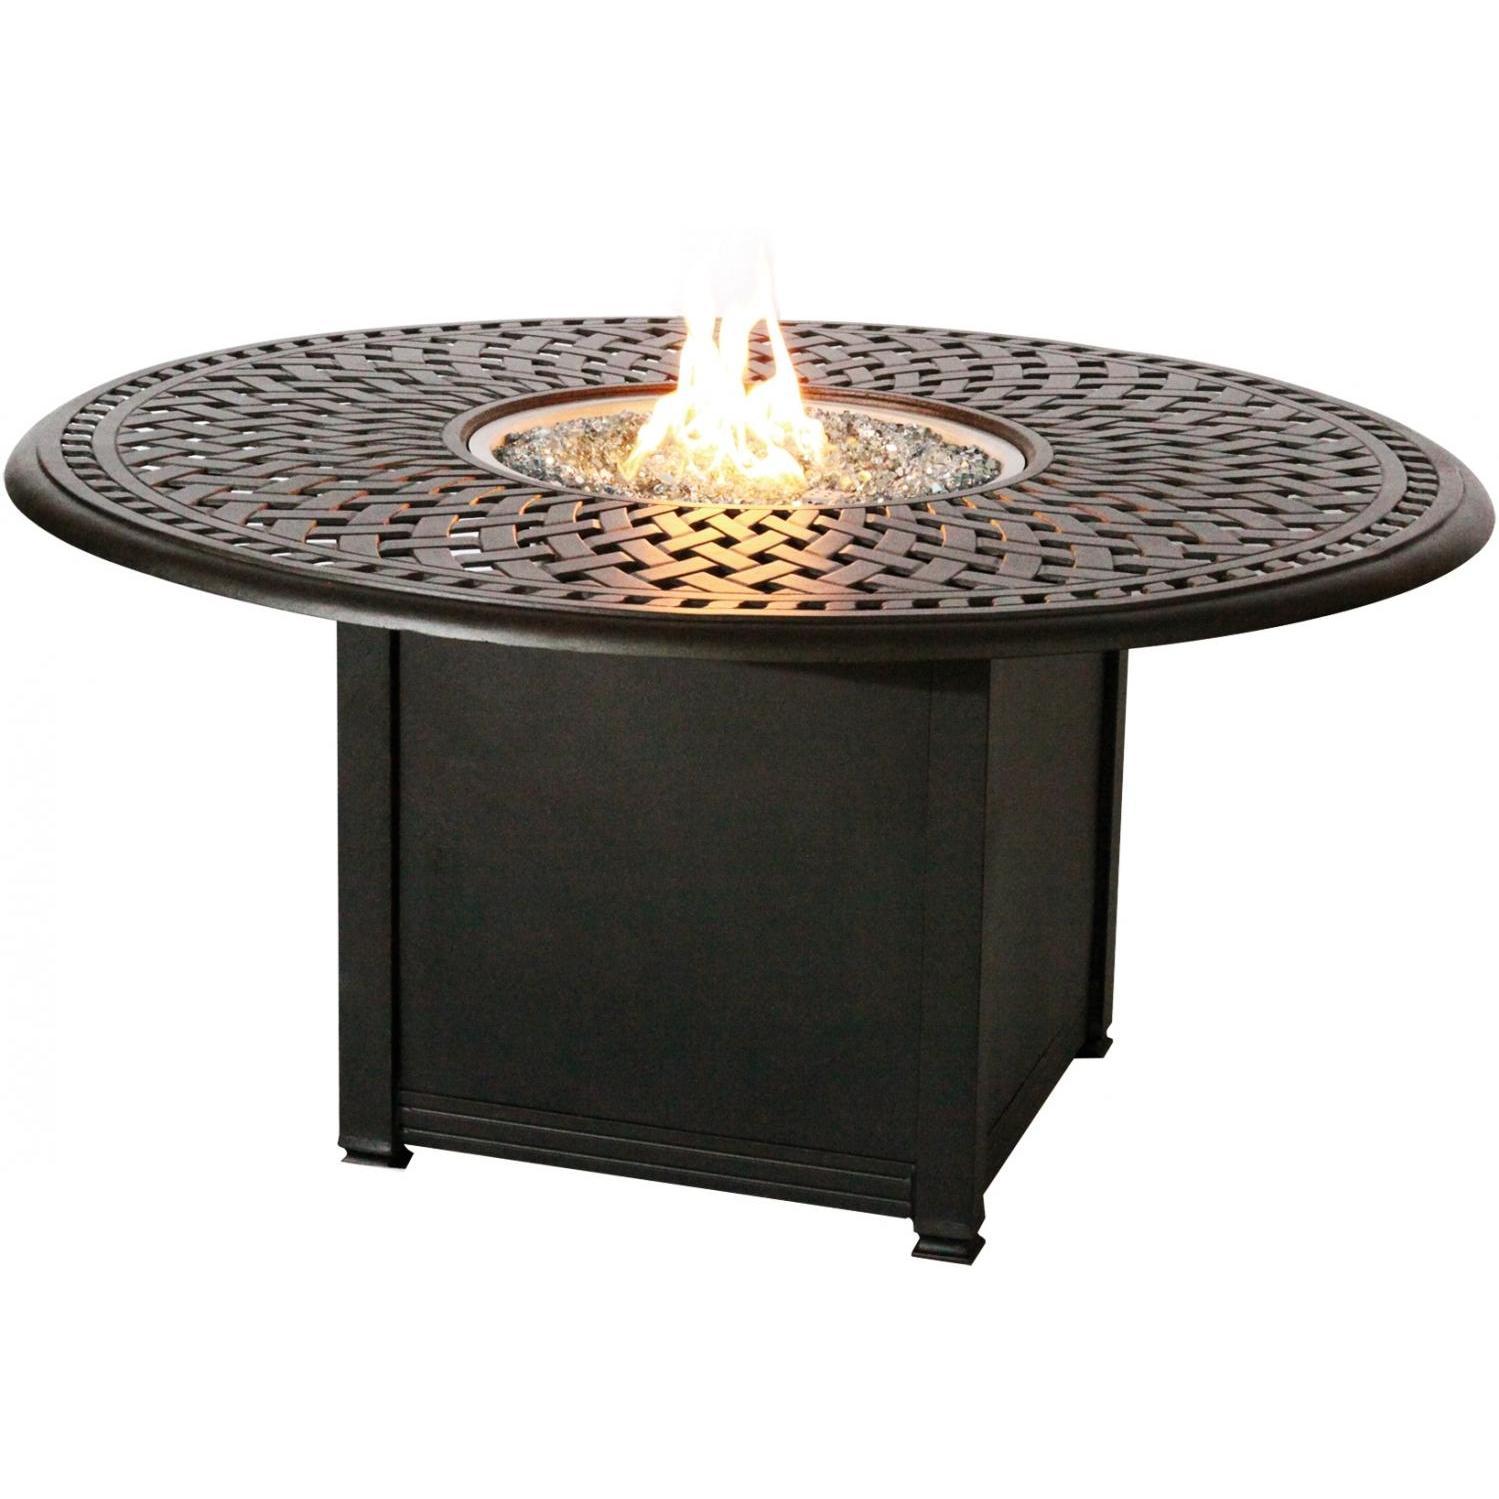 Contemporary Darlee Round Patio Conversation Table With Propane Fire Pit - Antique Bronze propane patio fireplace